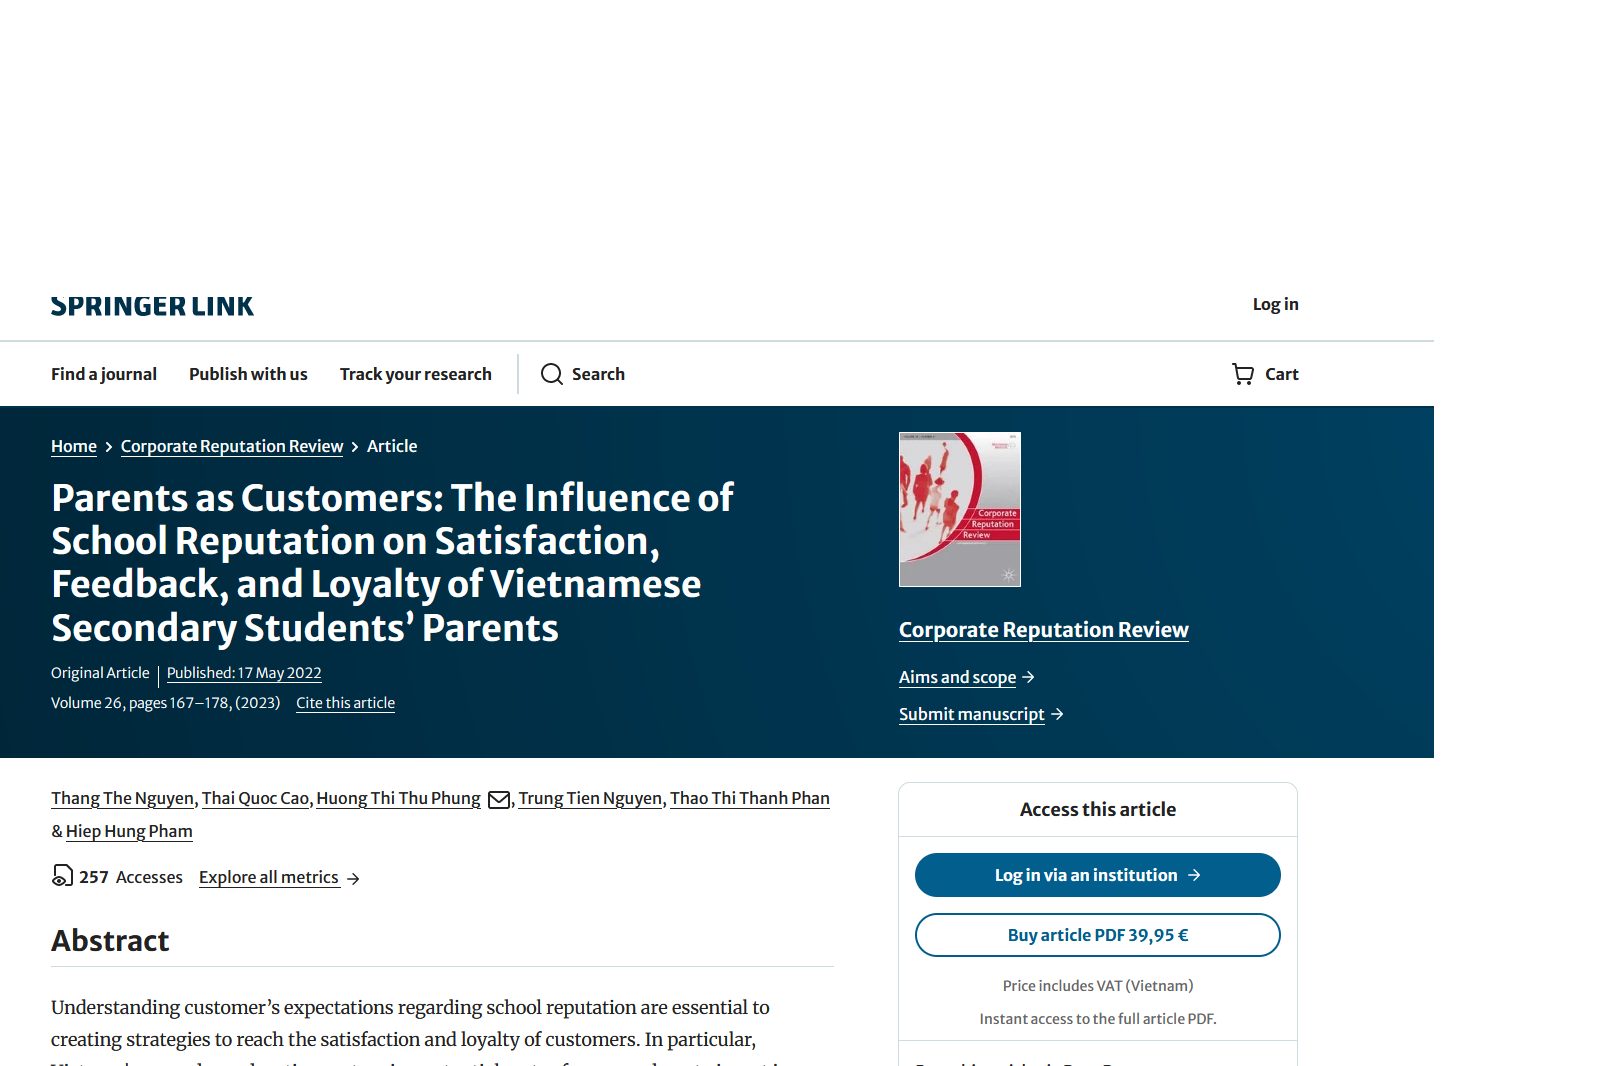 Parents as Customers: The Influence of School Reputation on Satisfaction, Feedback, and Loyalty of Vietnamese Secondary Students’ Parents